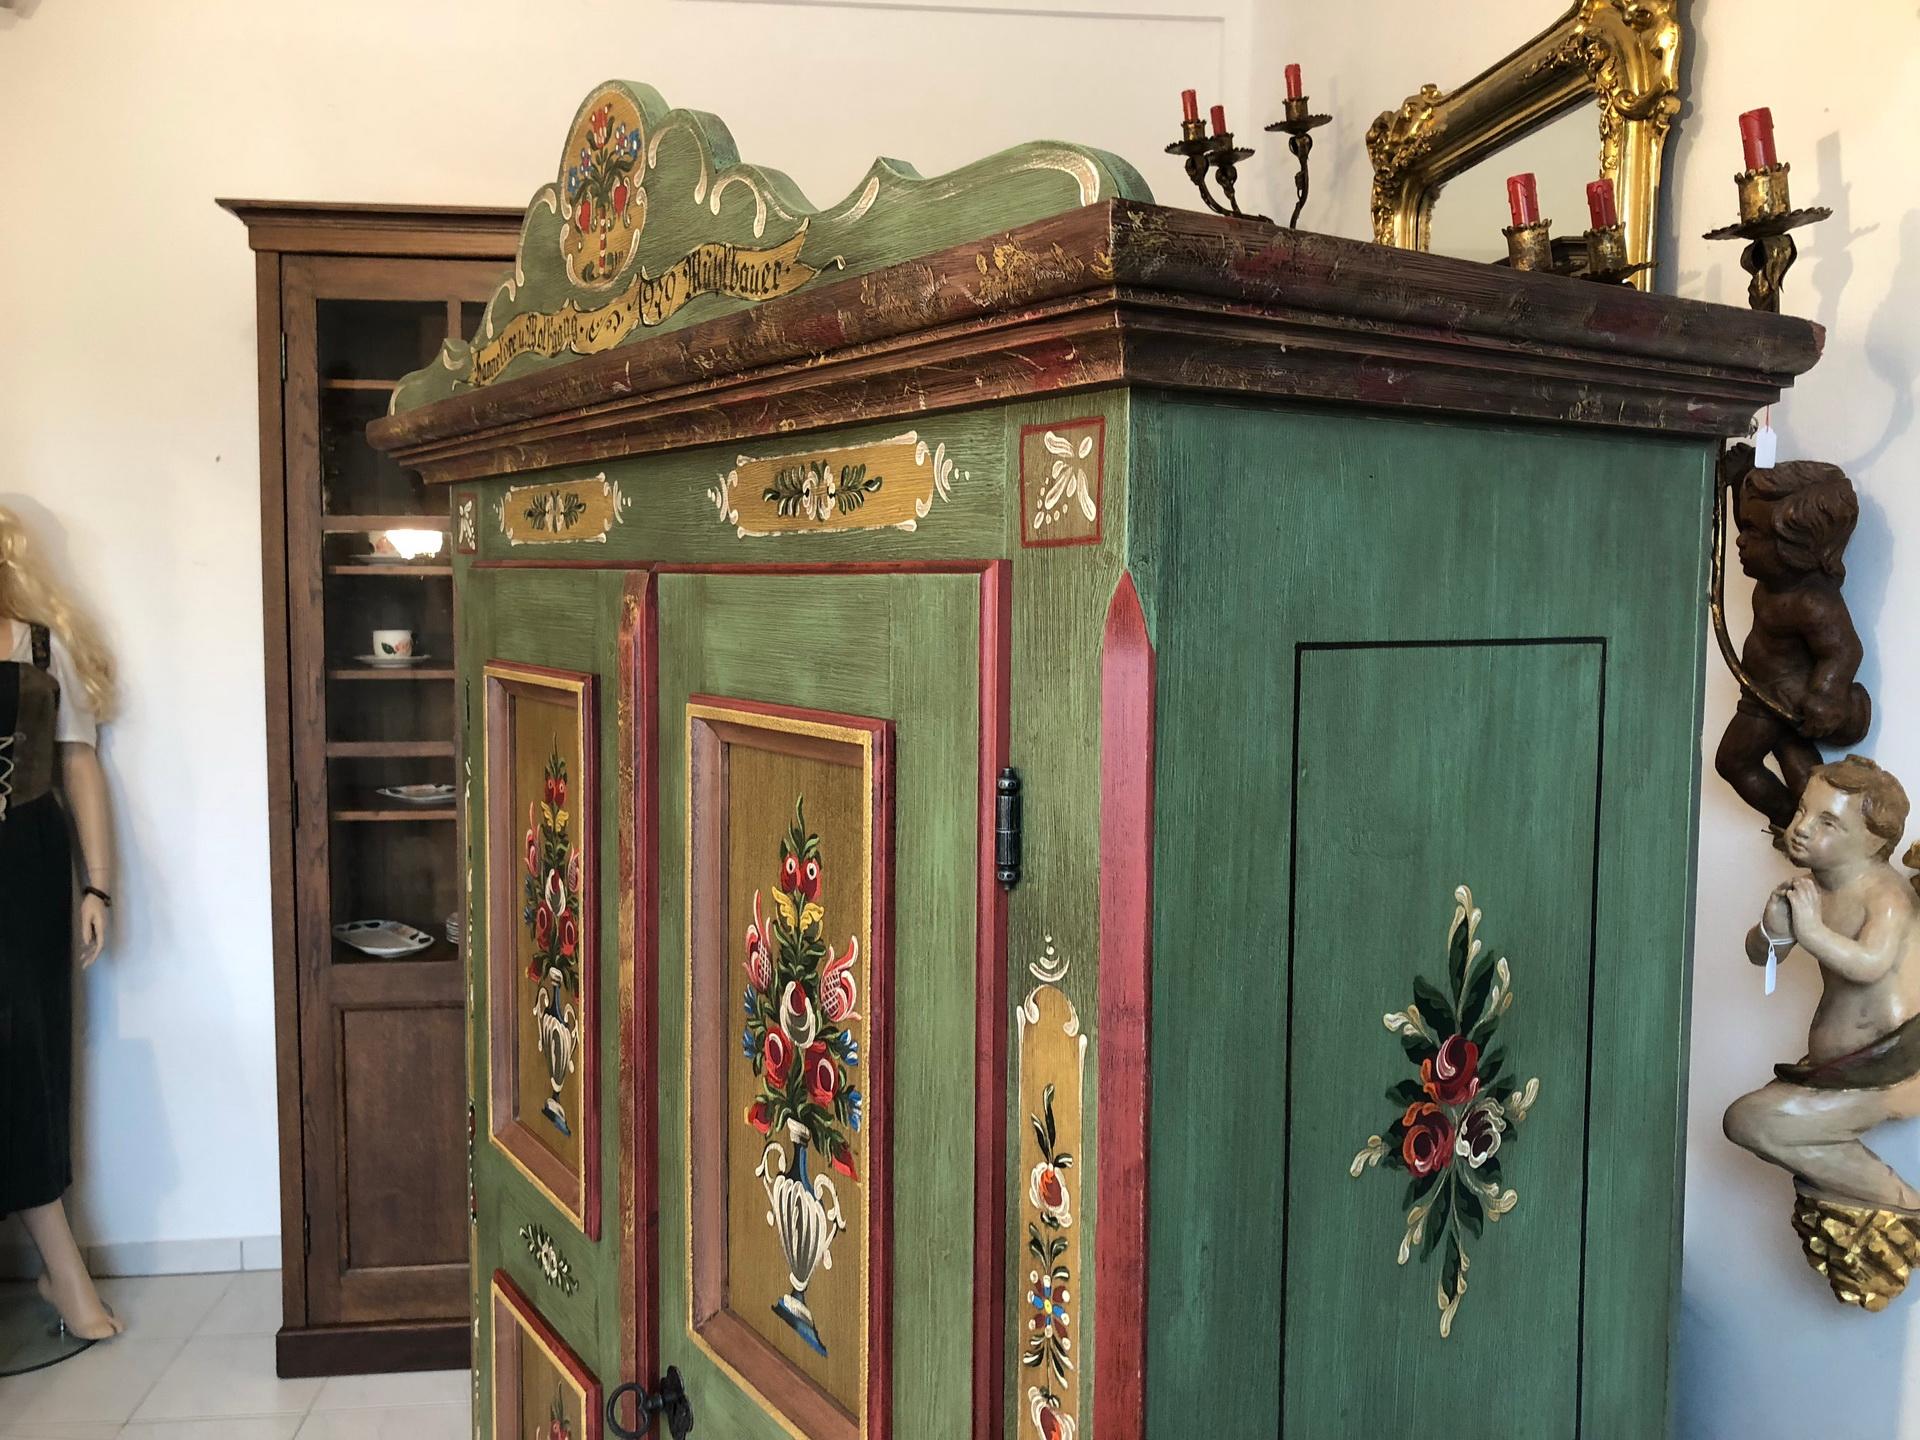 Original 2-door Voglauer farmhouse cabinet from circa 1800.
Features hand painted floral drawings all-over the front and side panels.
The cabinet is an eyecatcher for your living room or hall.
This cabinet is an ideal piece for use as a wardrobe